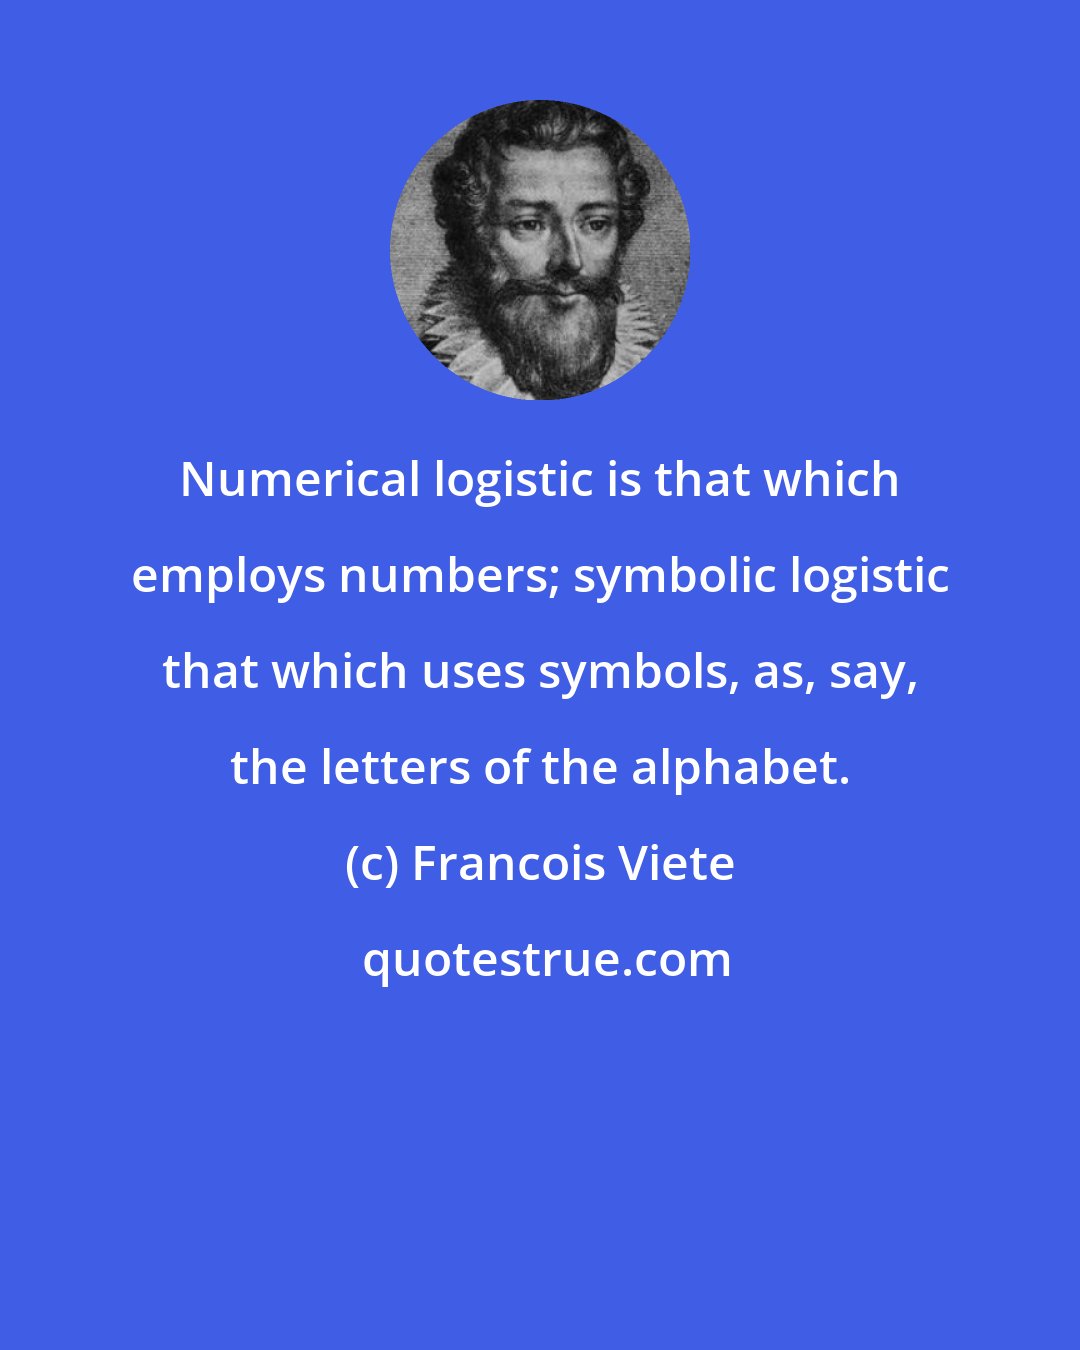 Francois Viete: Numerical logistic is that which employs numbers; symbolic logistic that which uses symbols, as, say, the letters of the alphabet.